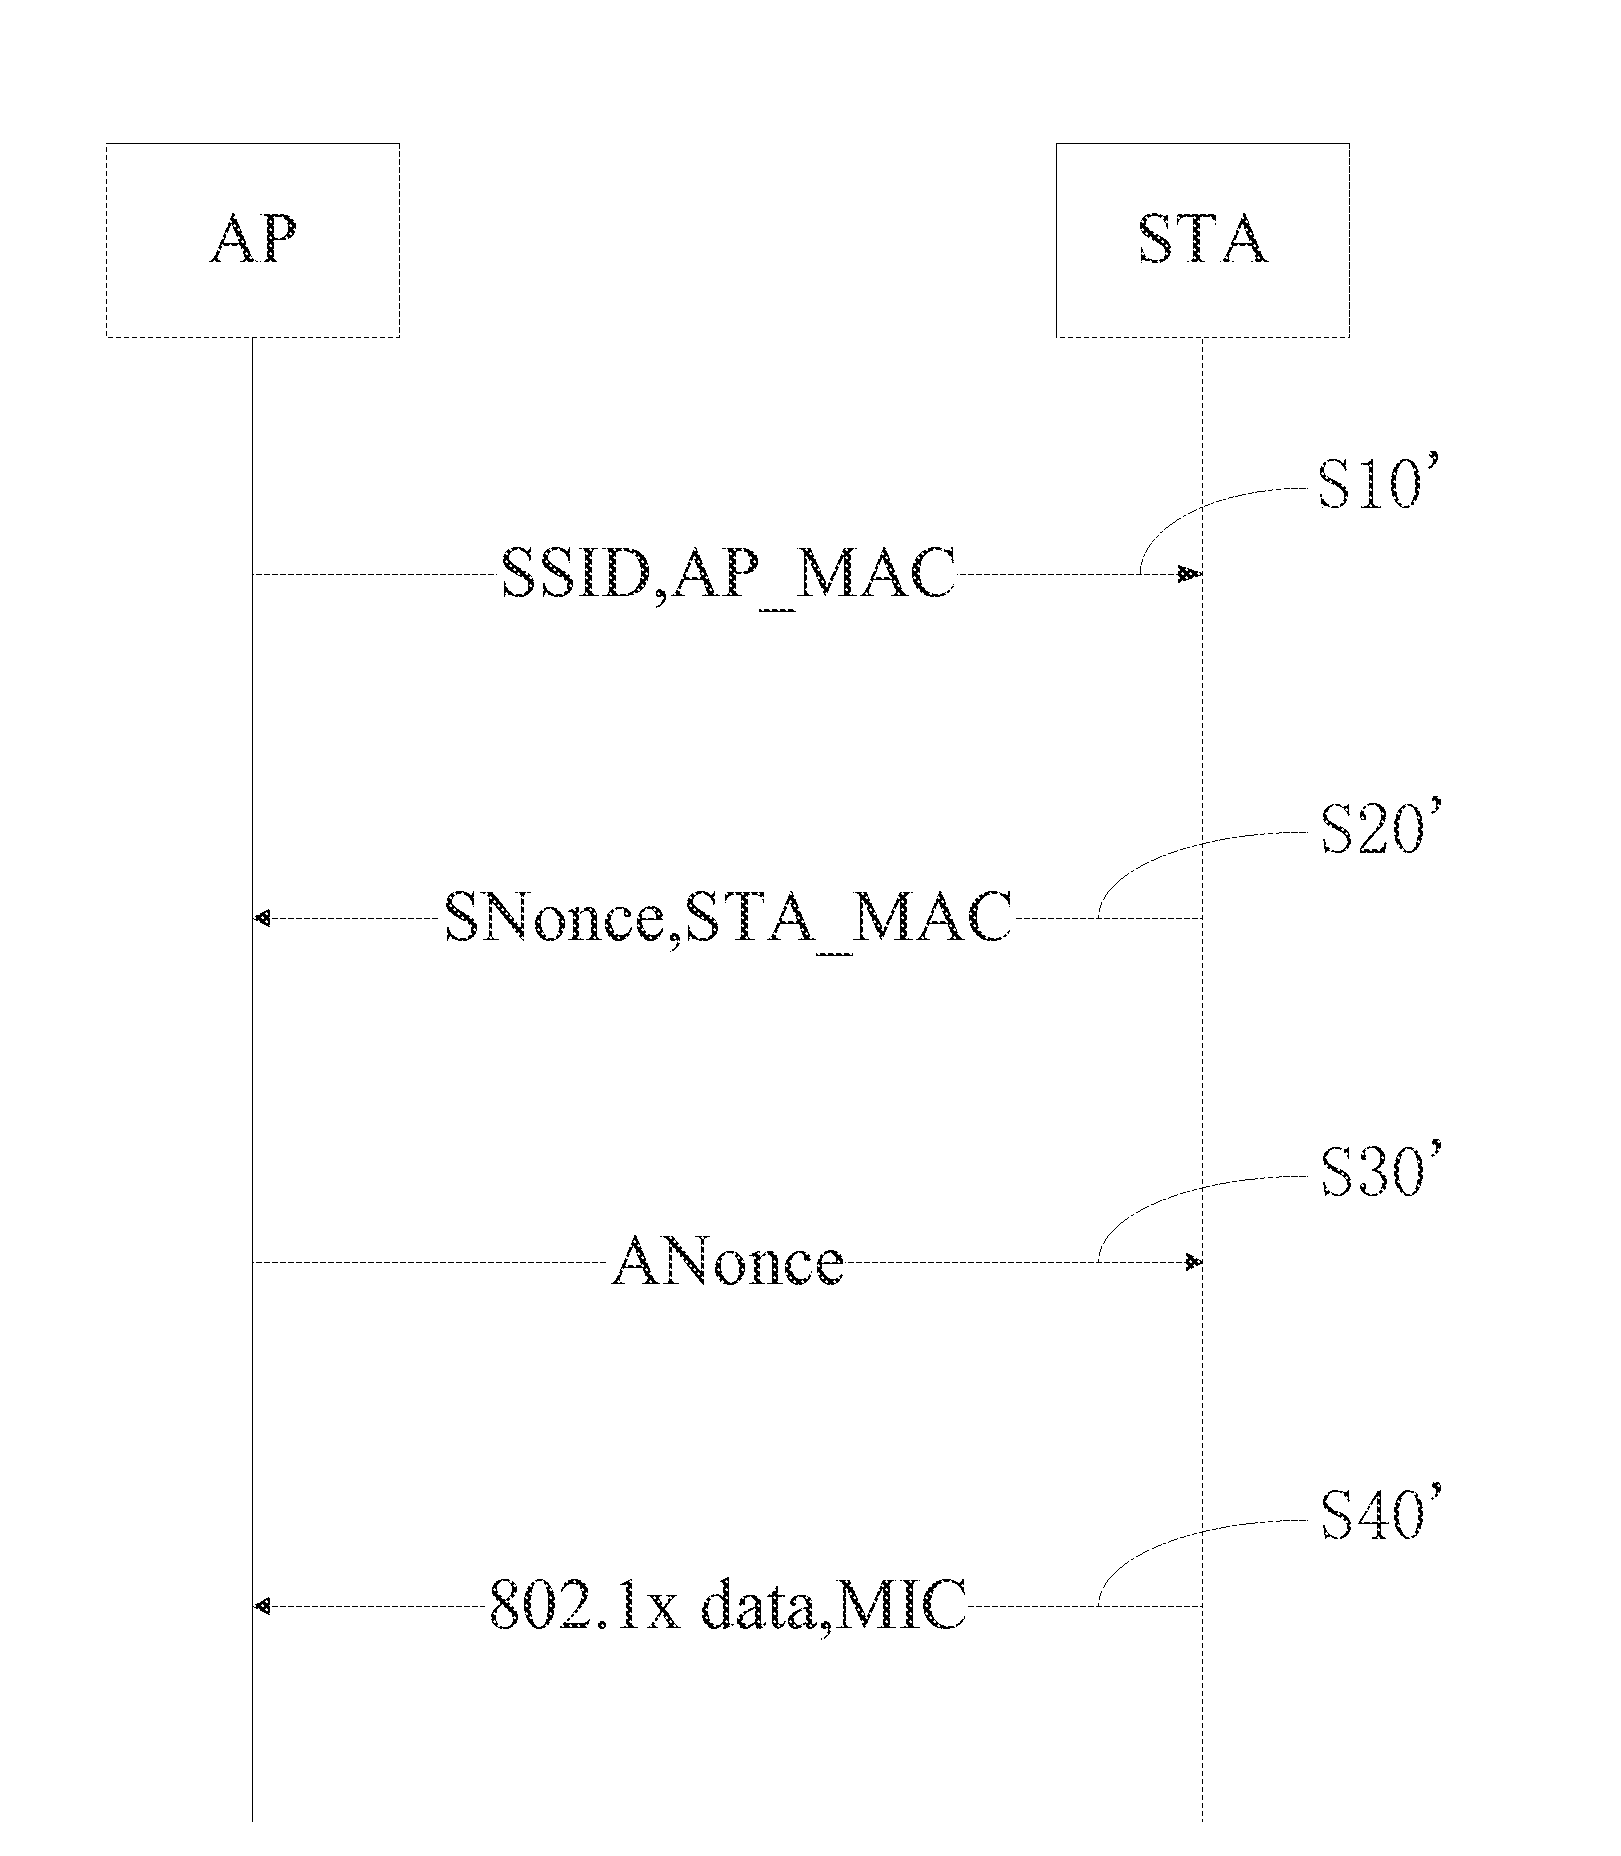 Method and system for securely accessing portable hotspot for intelligent mobile phones